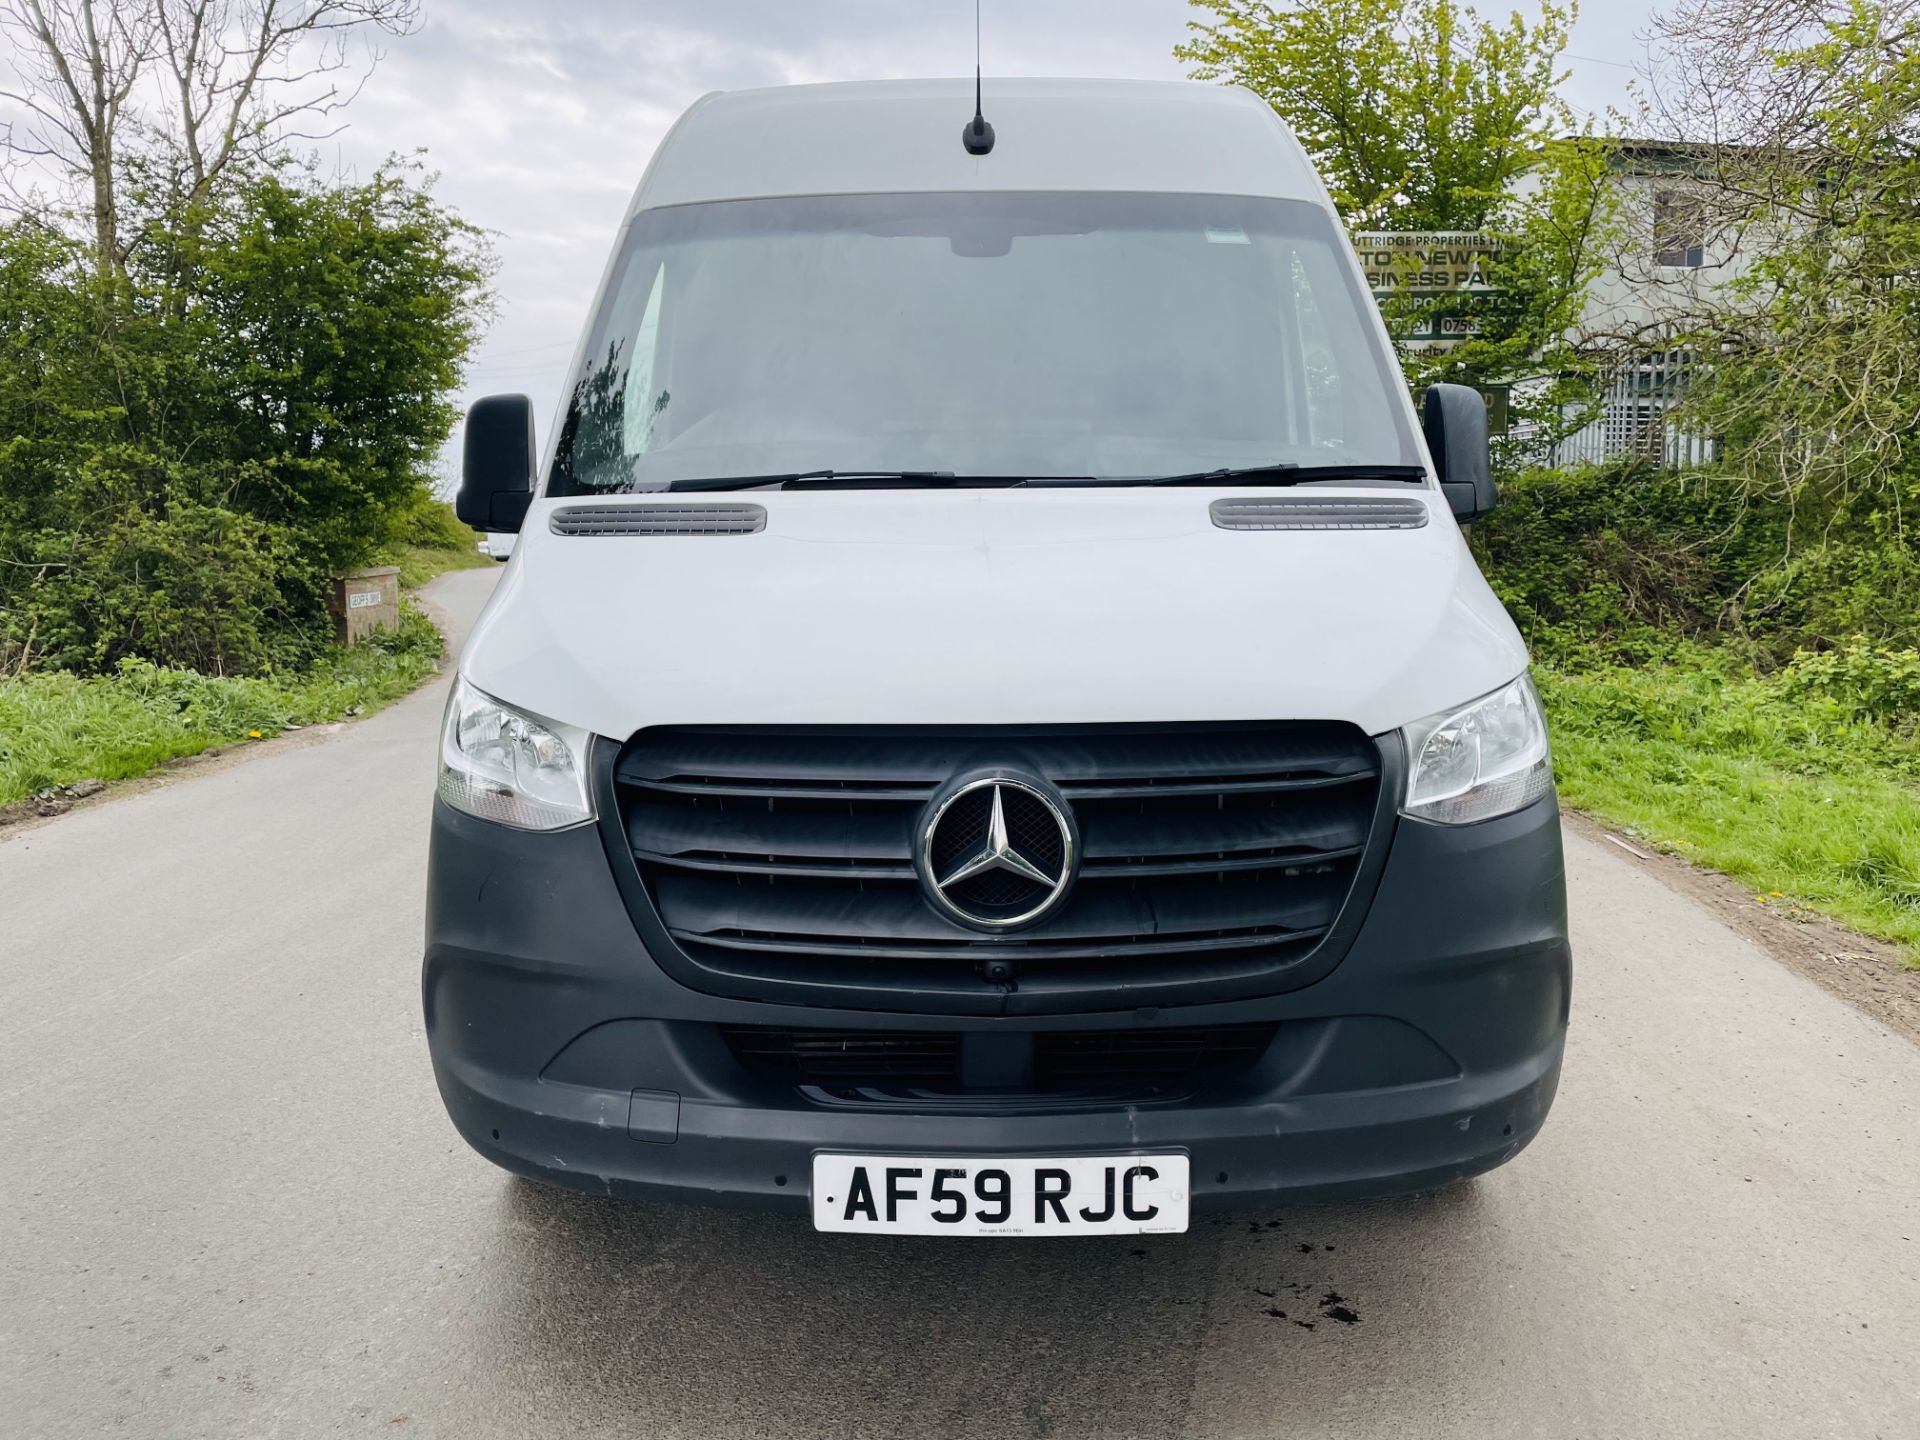 (ON SALE) MERCEDES SPRINTER 314CDI "LWB" HIGH ROOF (19 REG) EURO 6 - ONLY 83K MILES - CRUISE CONTROL - Image 9 of 17